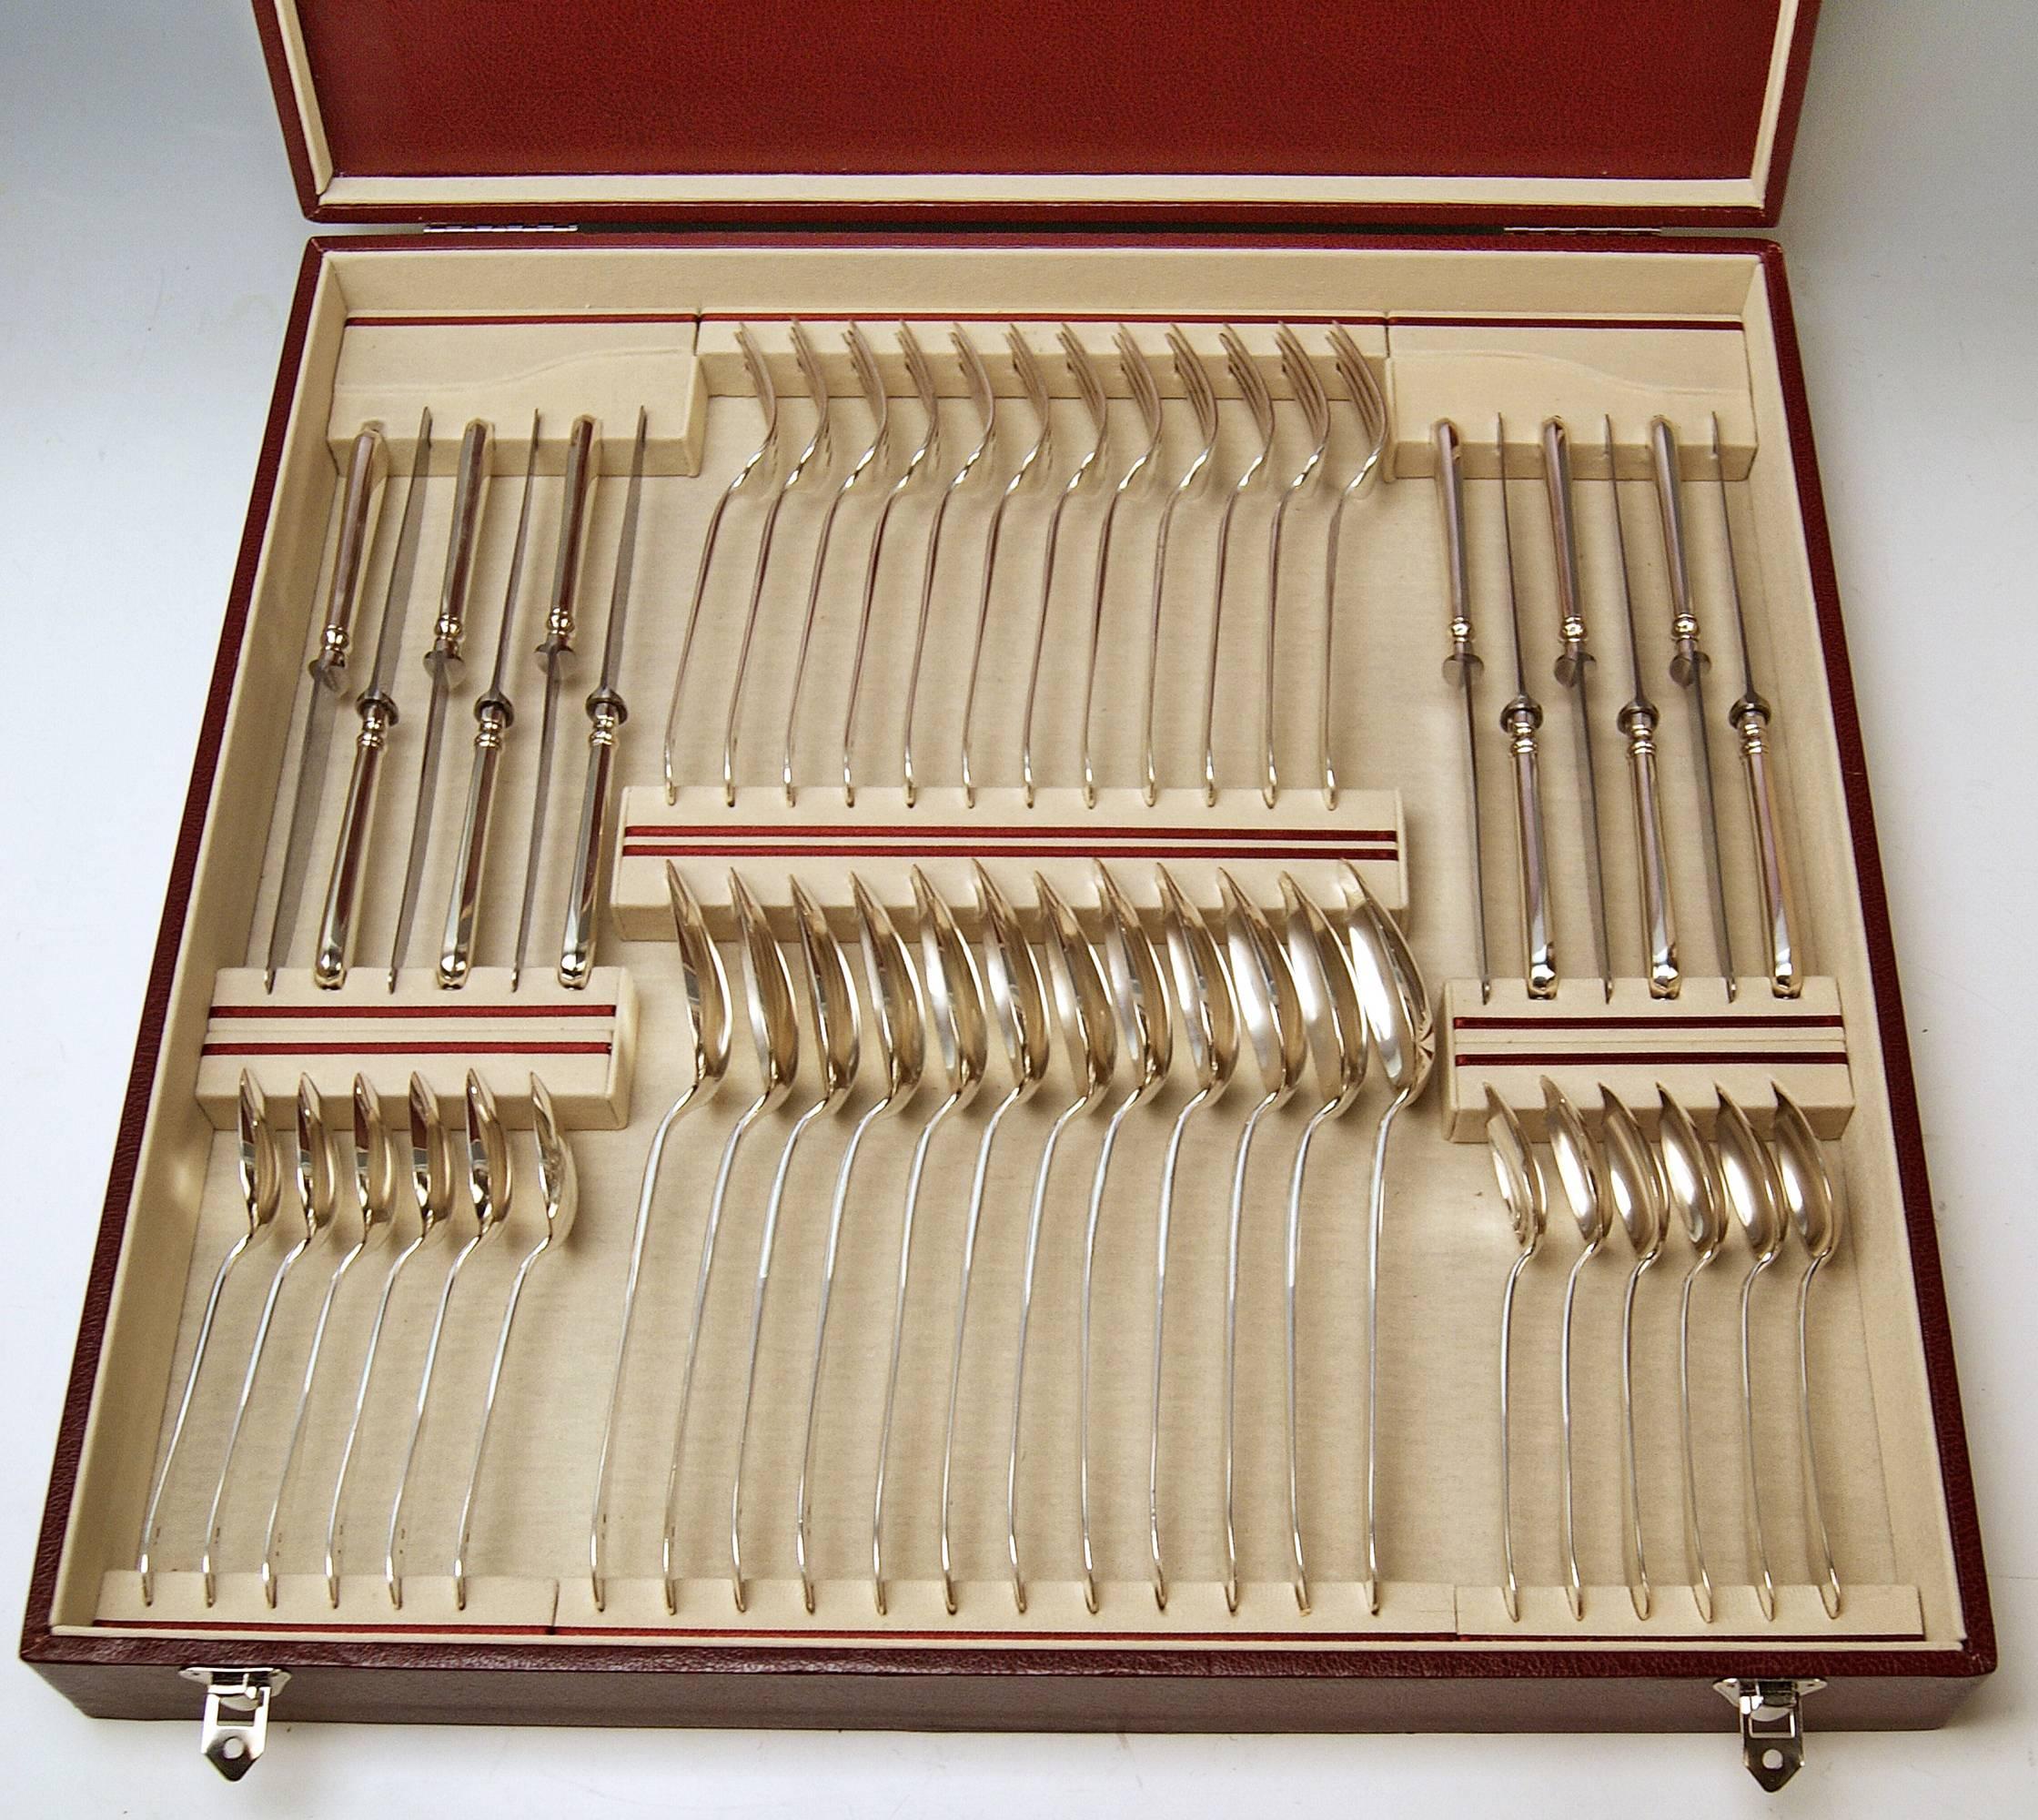 Silver 48-piece flatware (cutlery set) for 12 persons,
Made by Vincenz Carl Dub, Austria / Vienna, circa 1900.

Gorgeous Austrian cutlery set, flatware or dinnerware consisting of 48 pieces. - Most elegant design = SO SAID 'WIENER WAMPERL' (= a